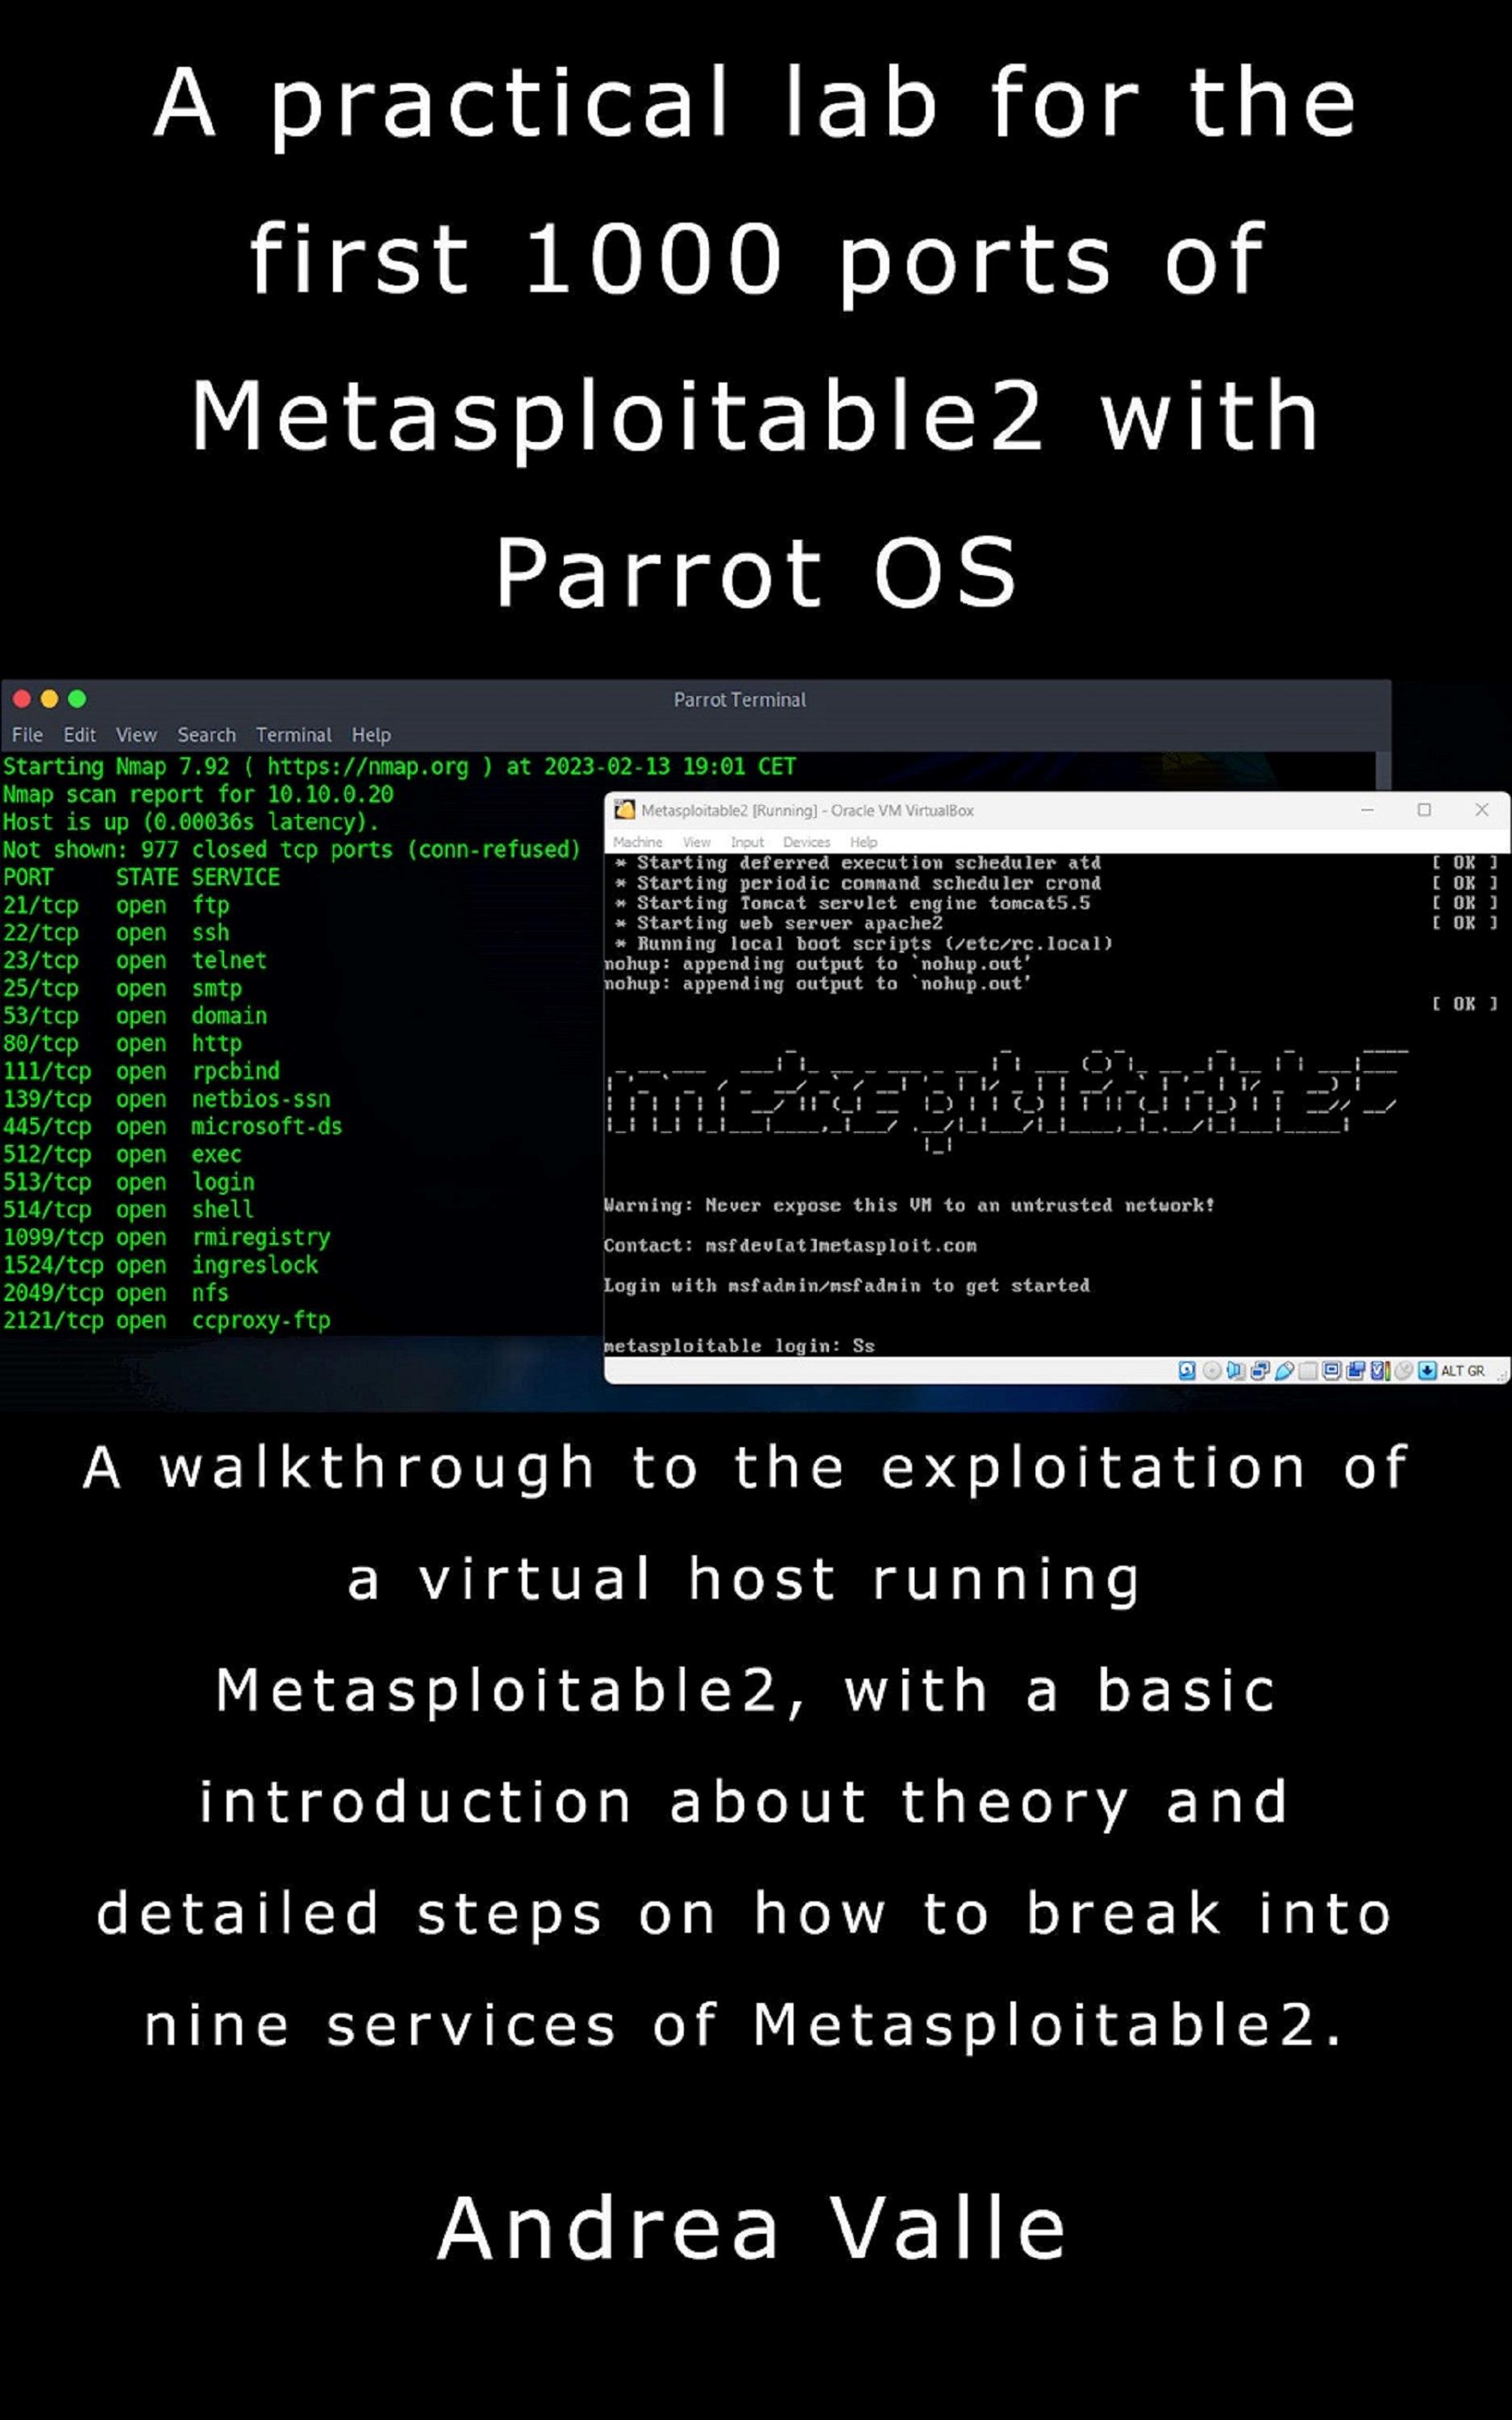 A practical lab for the first 1000 ports of Metasploitable2 with Parrot OS